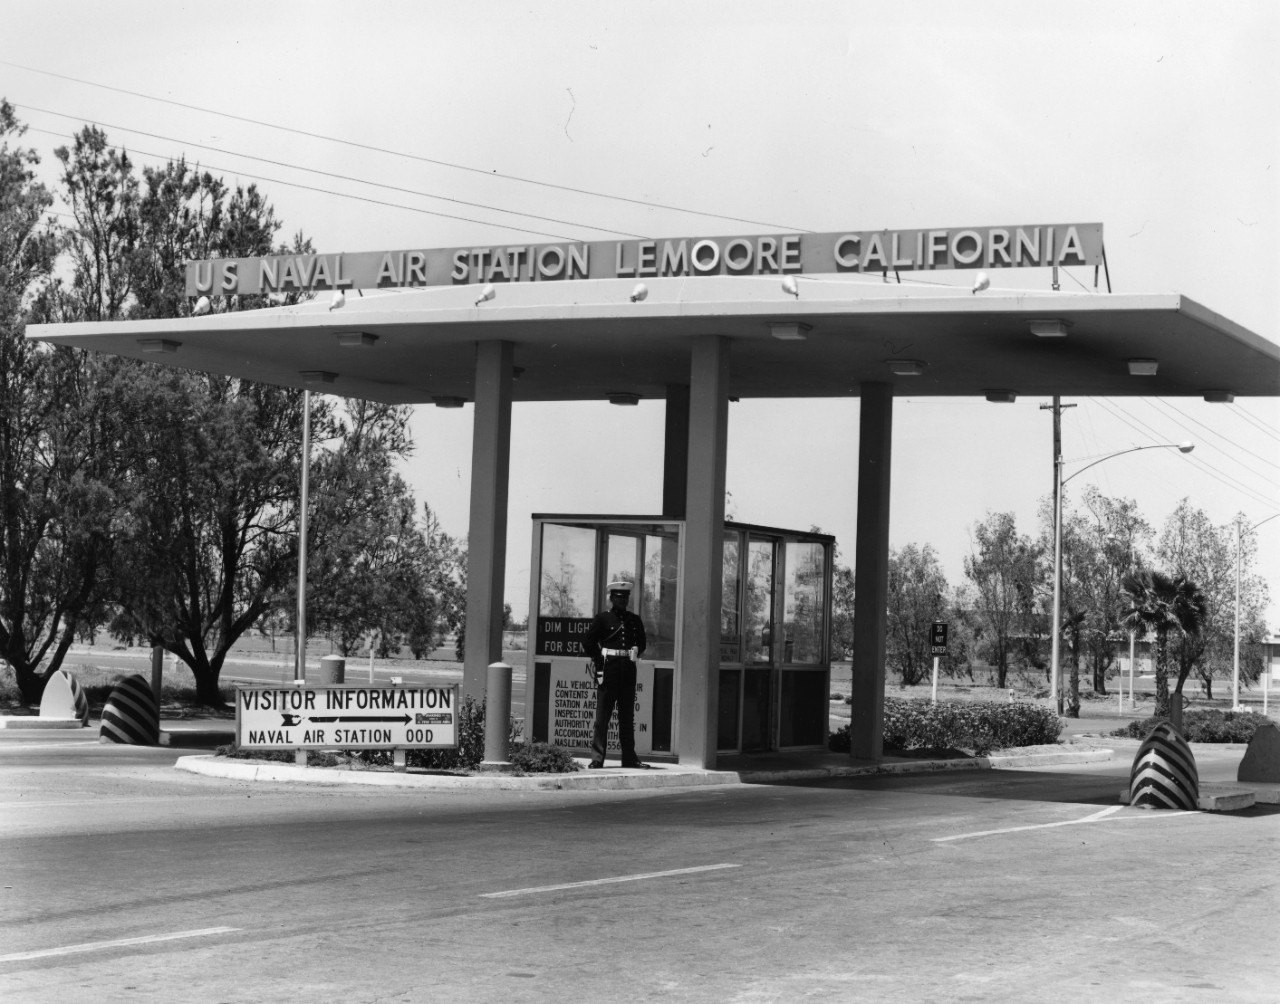 The front gate of Naval Air Station Lemoore, California